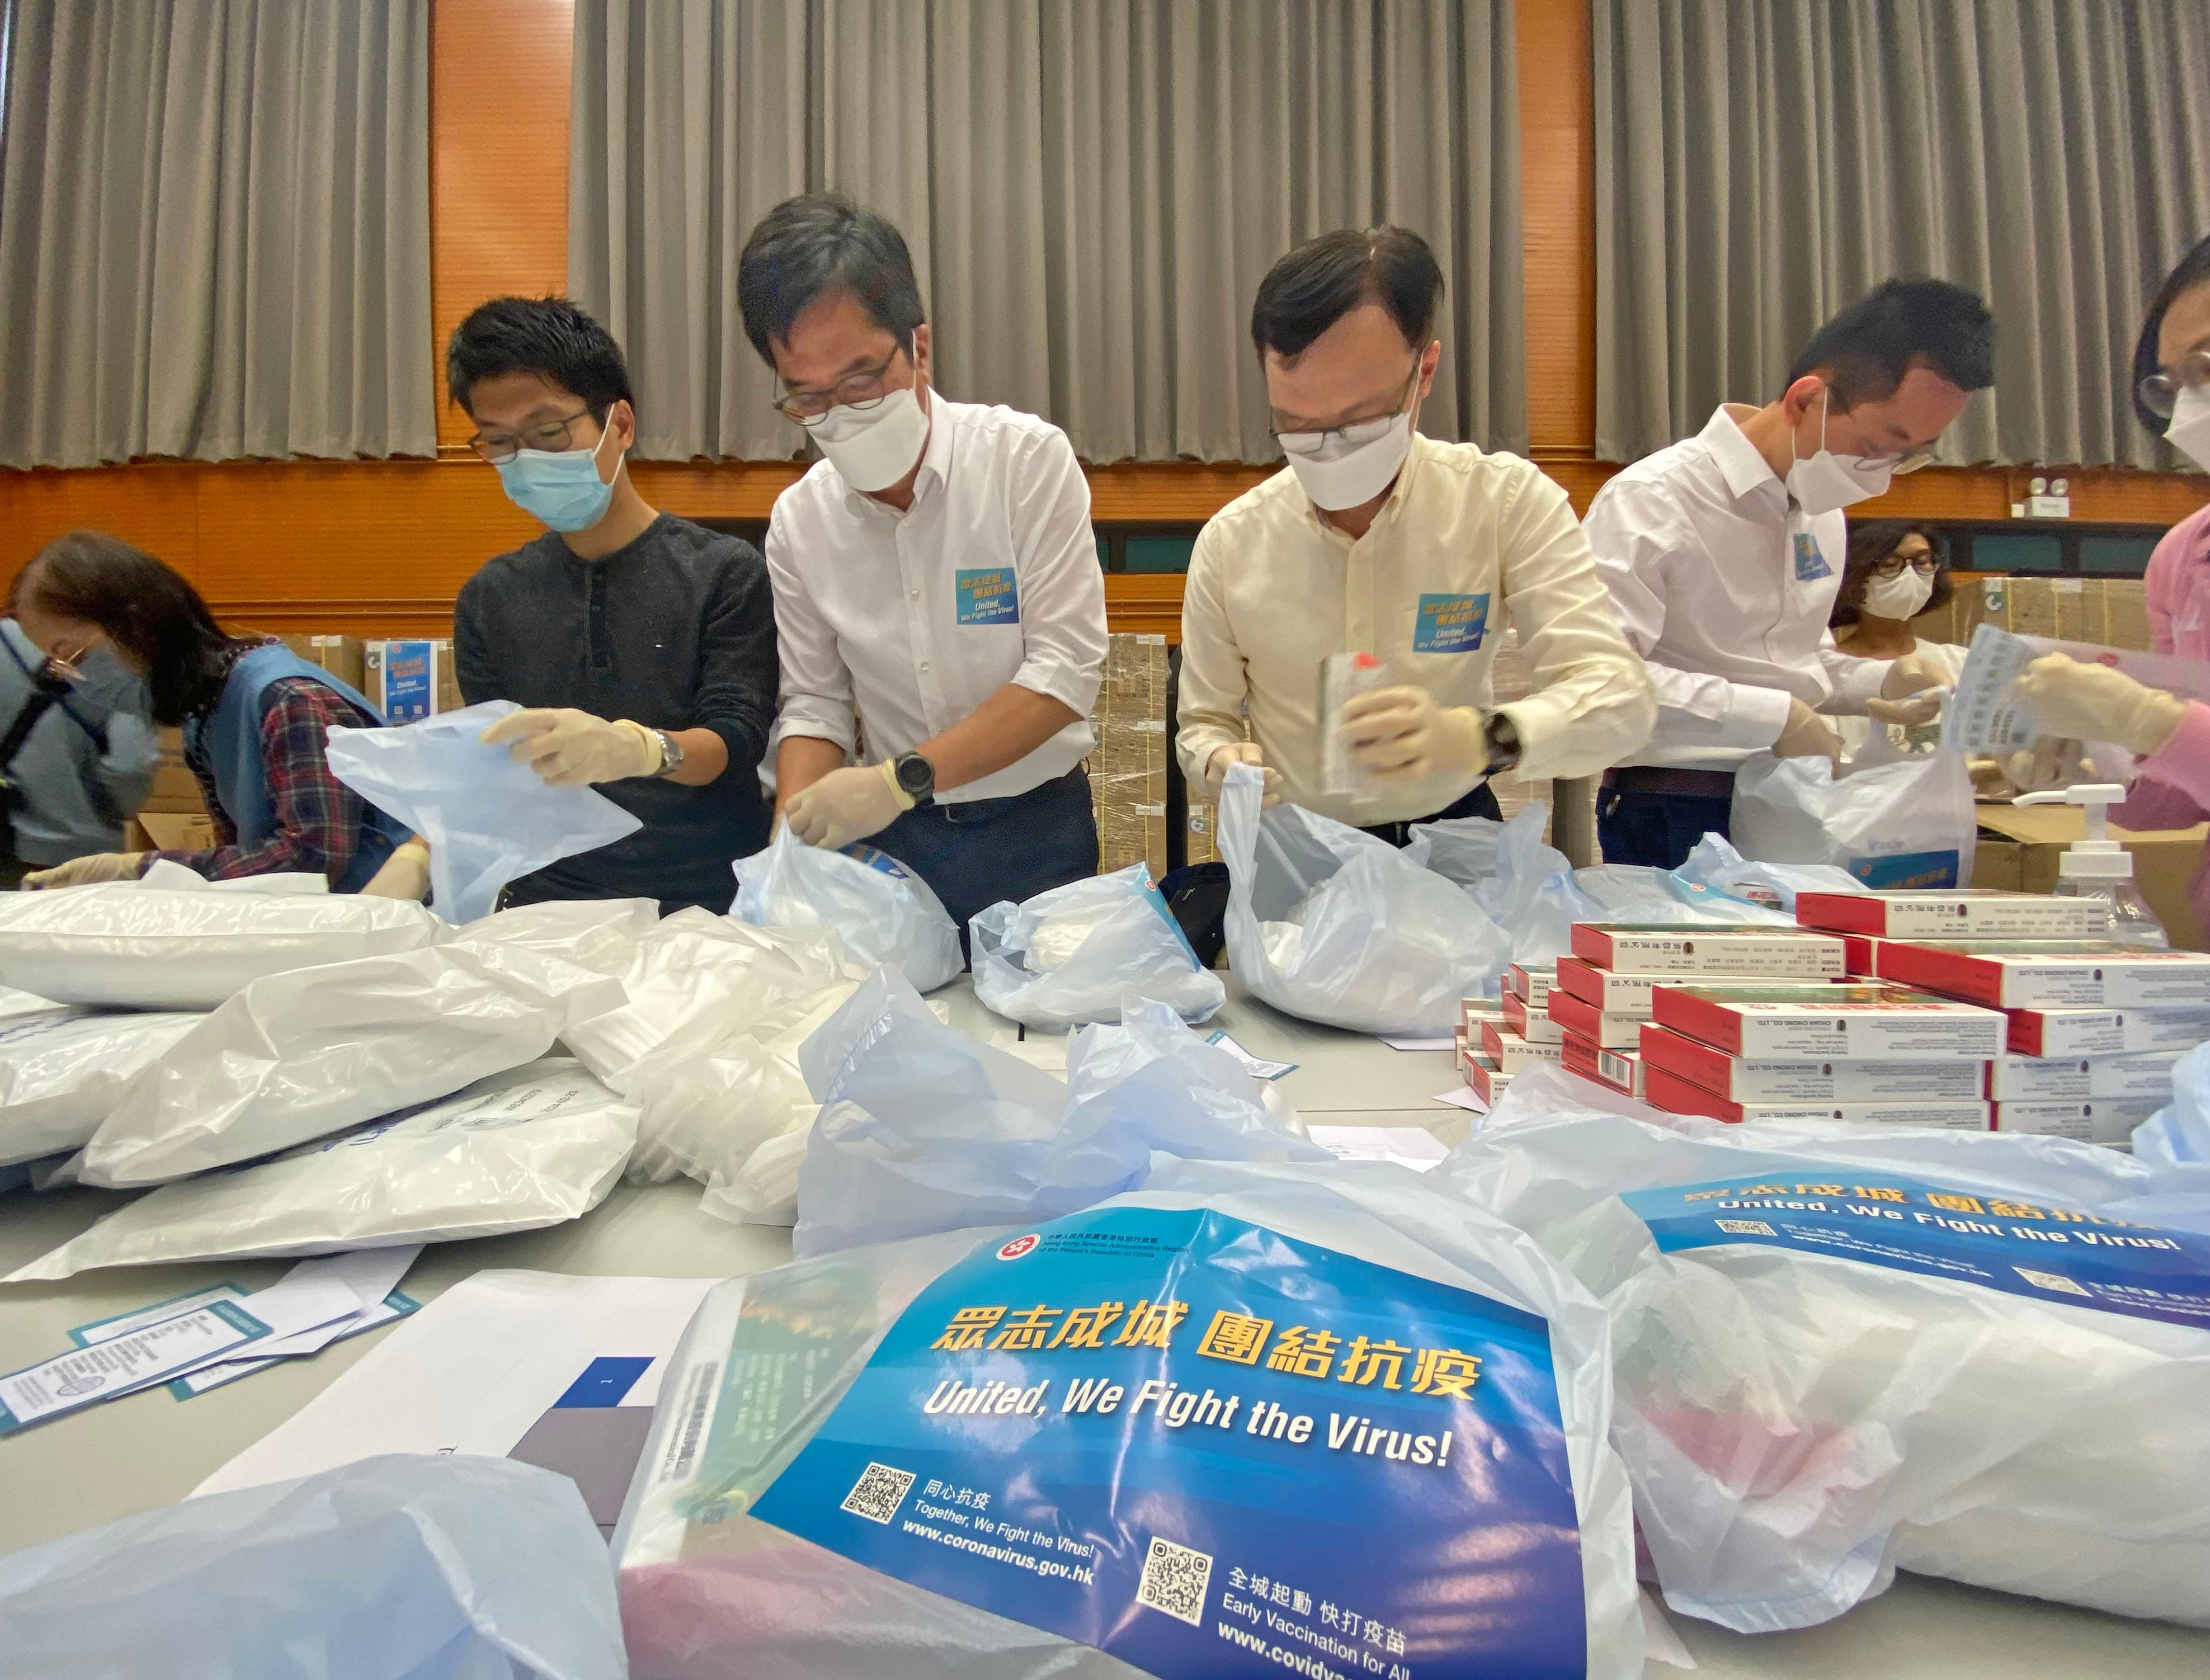 The Secretary for Development, Mr Michael Wong (centre); the Under Secretary for Development, Mr Liu Chun-san (second right); and Political Assistant to the Secretary for Development, Mr Allen Fung (first right), are packing anti-epidemic service bags with colleagues from the Development Bureau at Quarry Bay Sports Centre today (March 30).